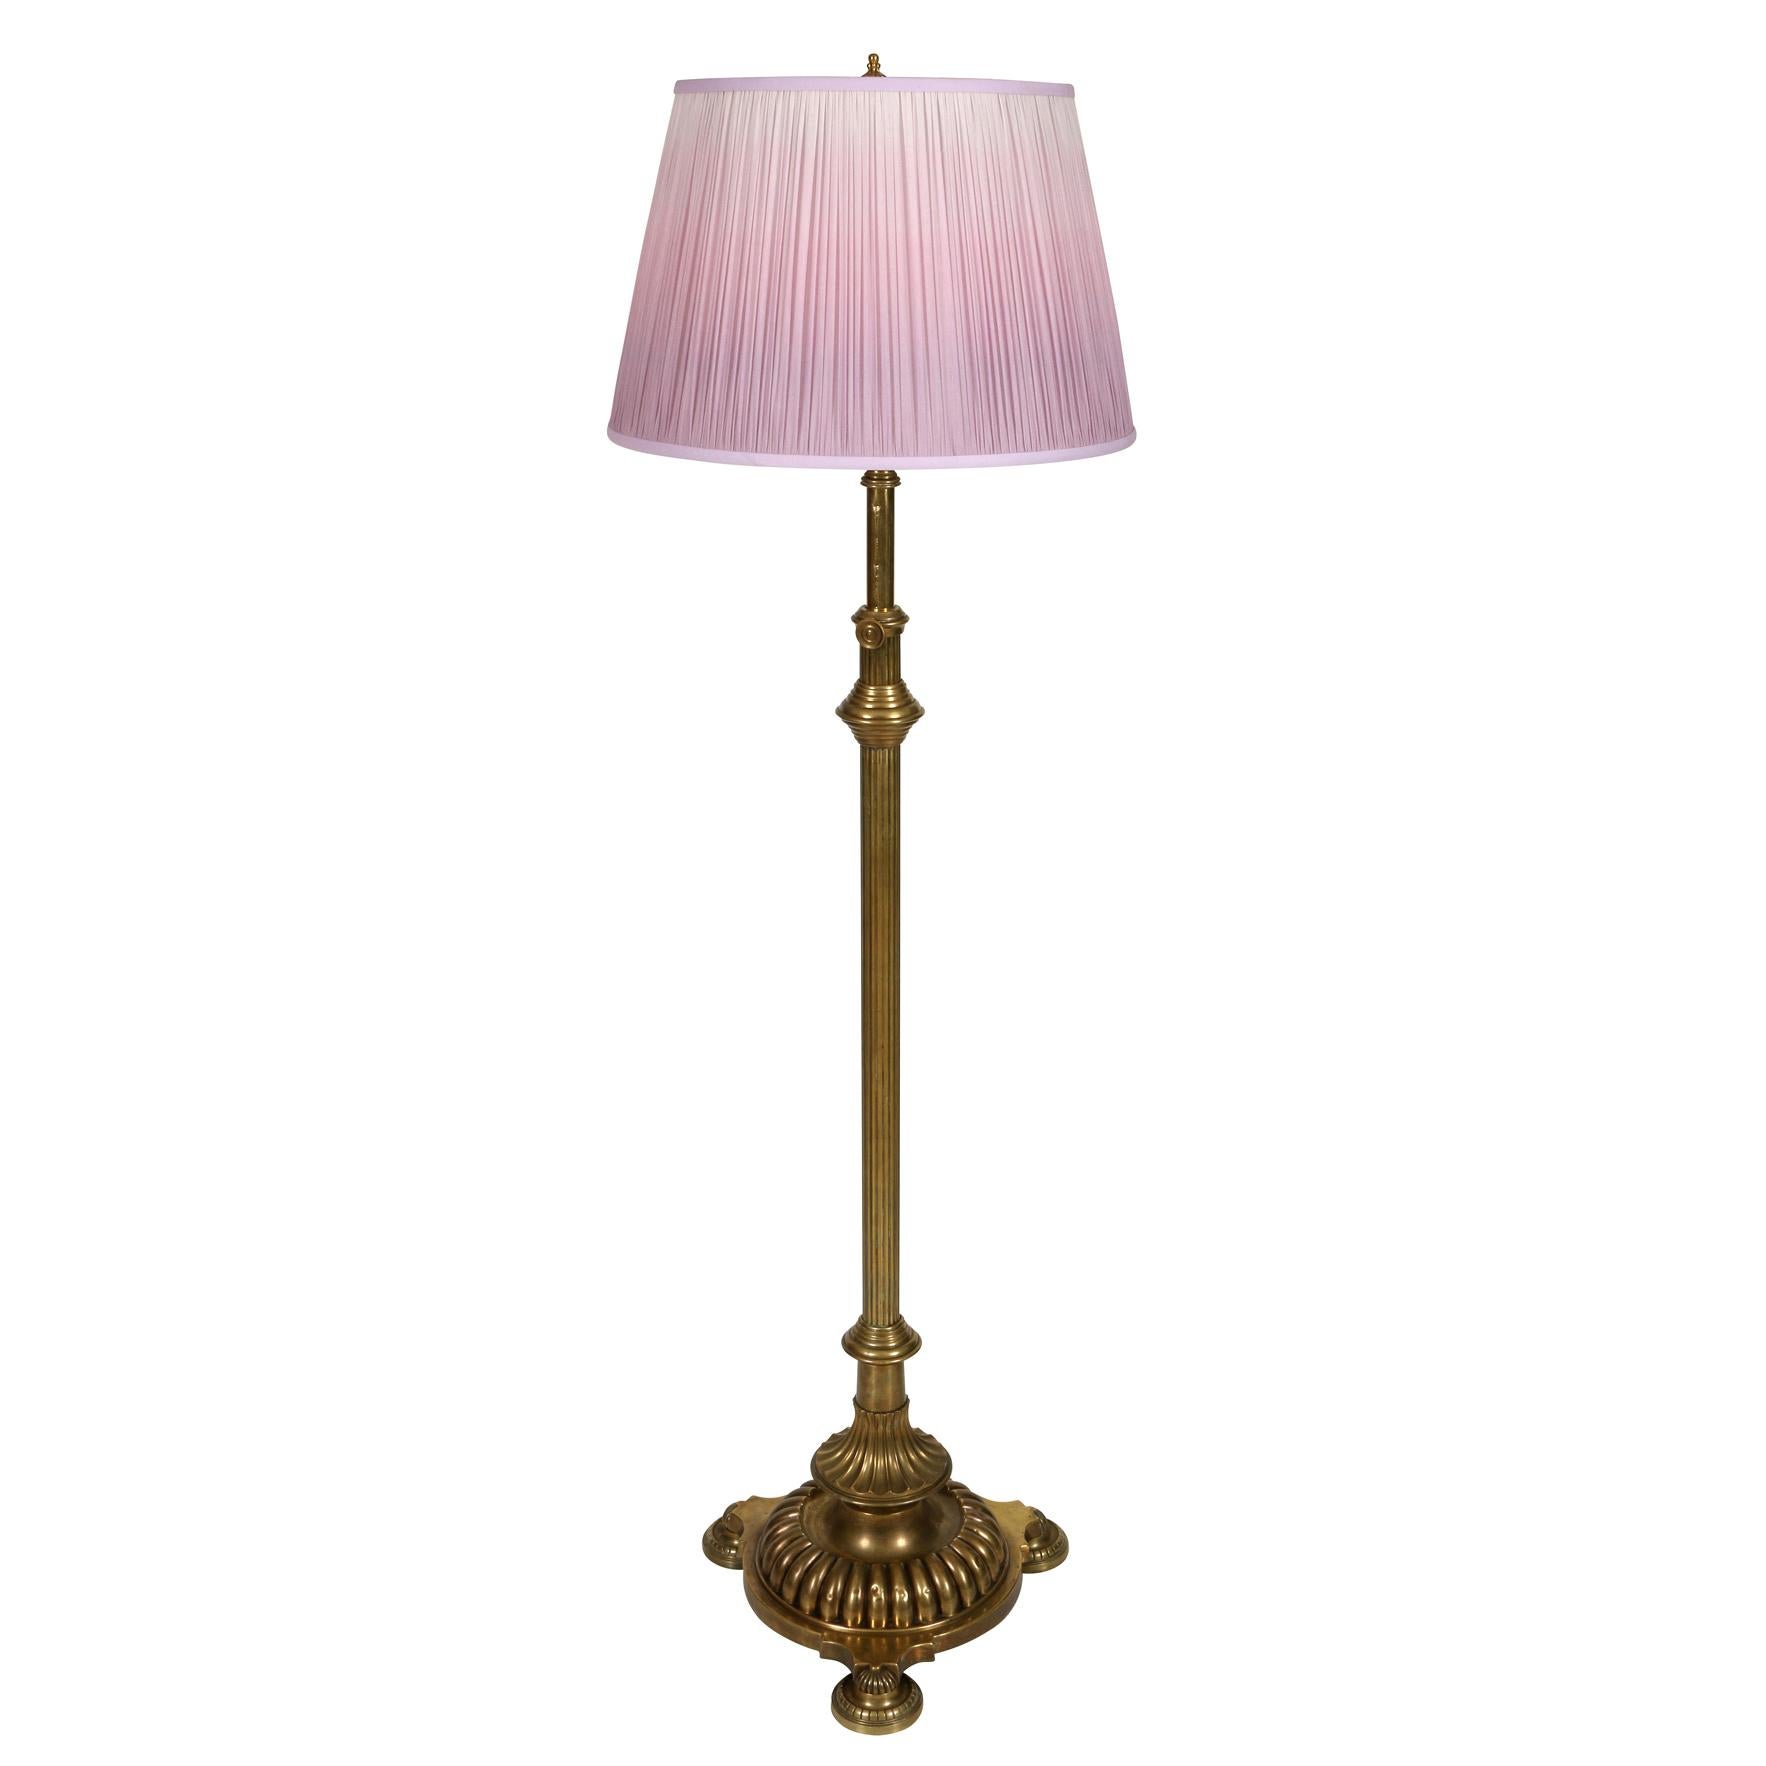 A pair of heavy brass English telescoping fluted floor lamps with round base on three feet. Shades sold separately.